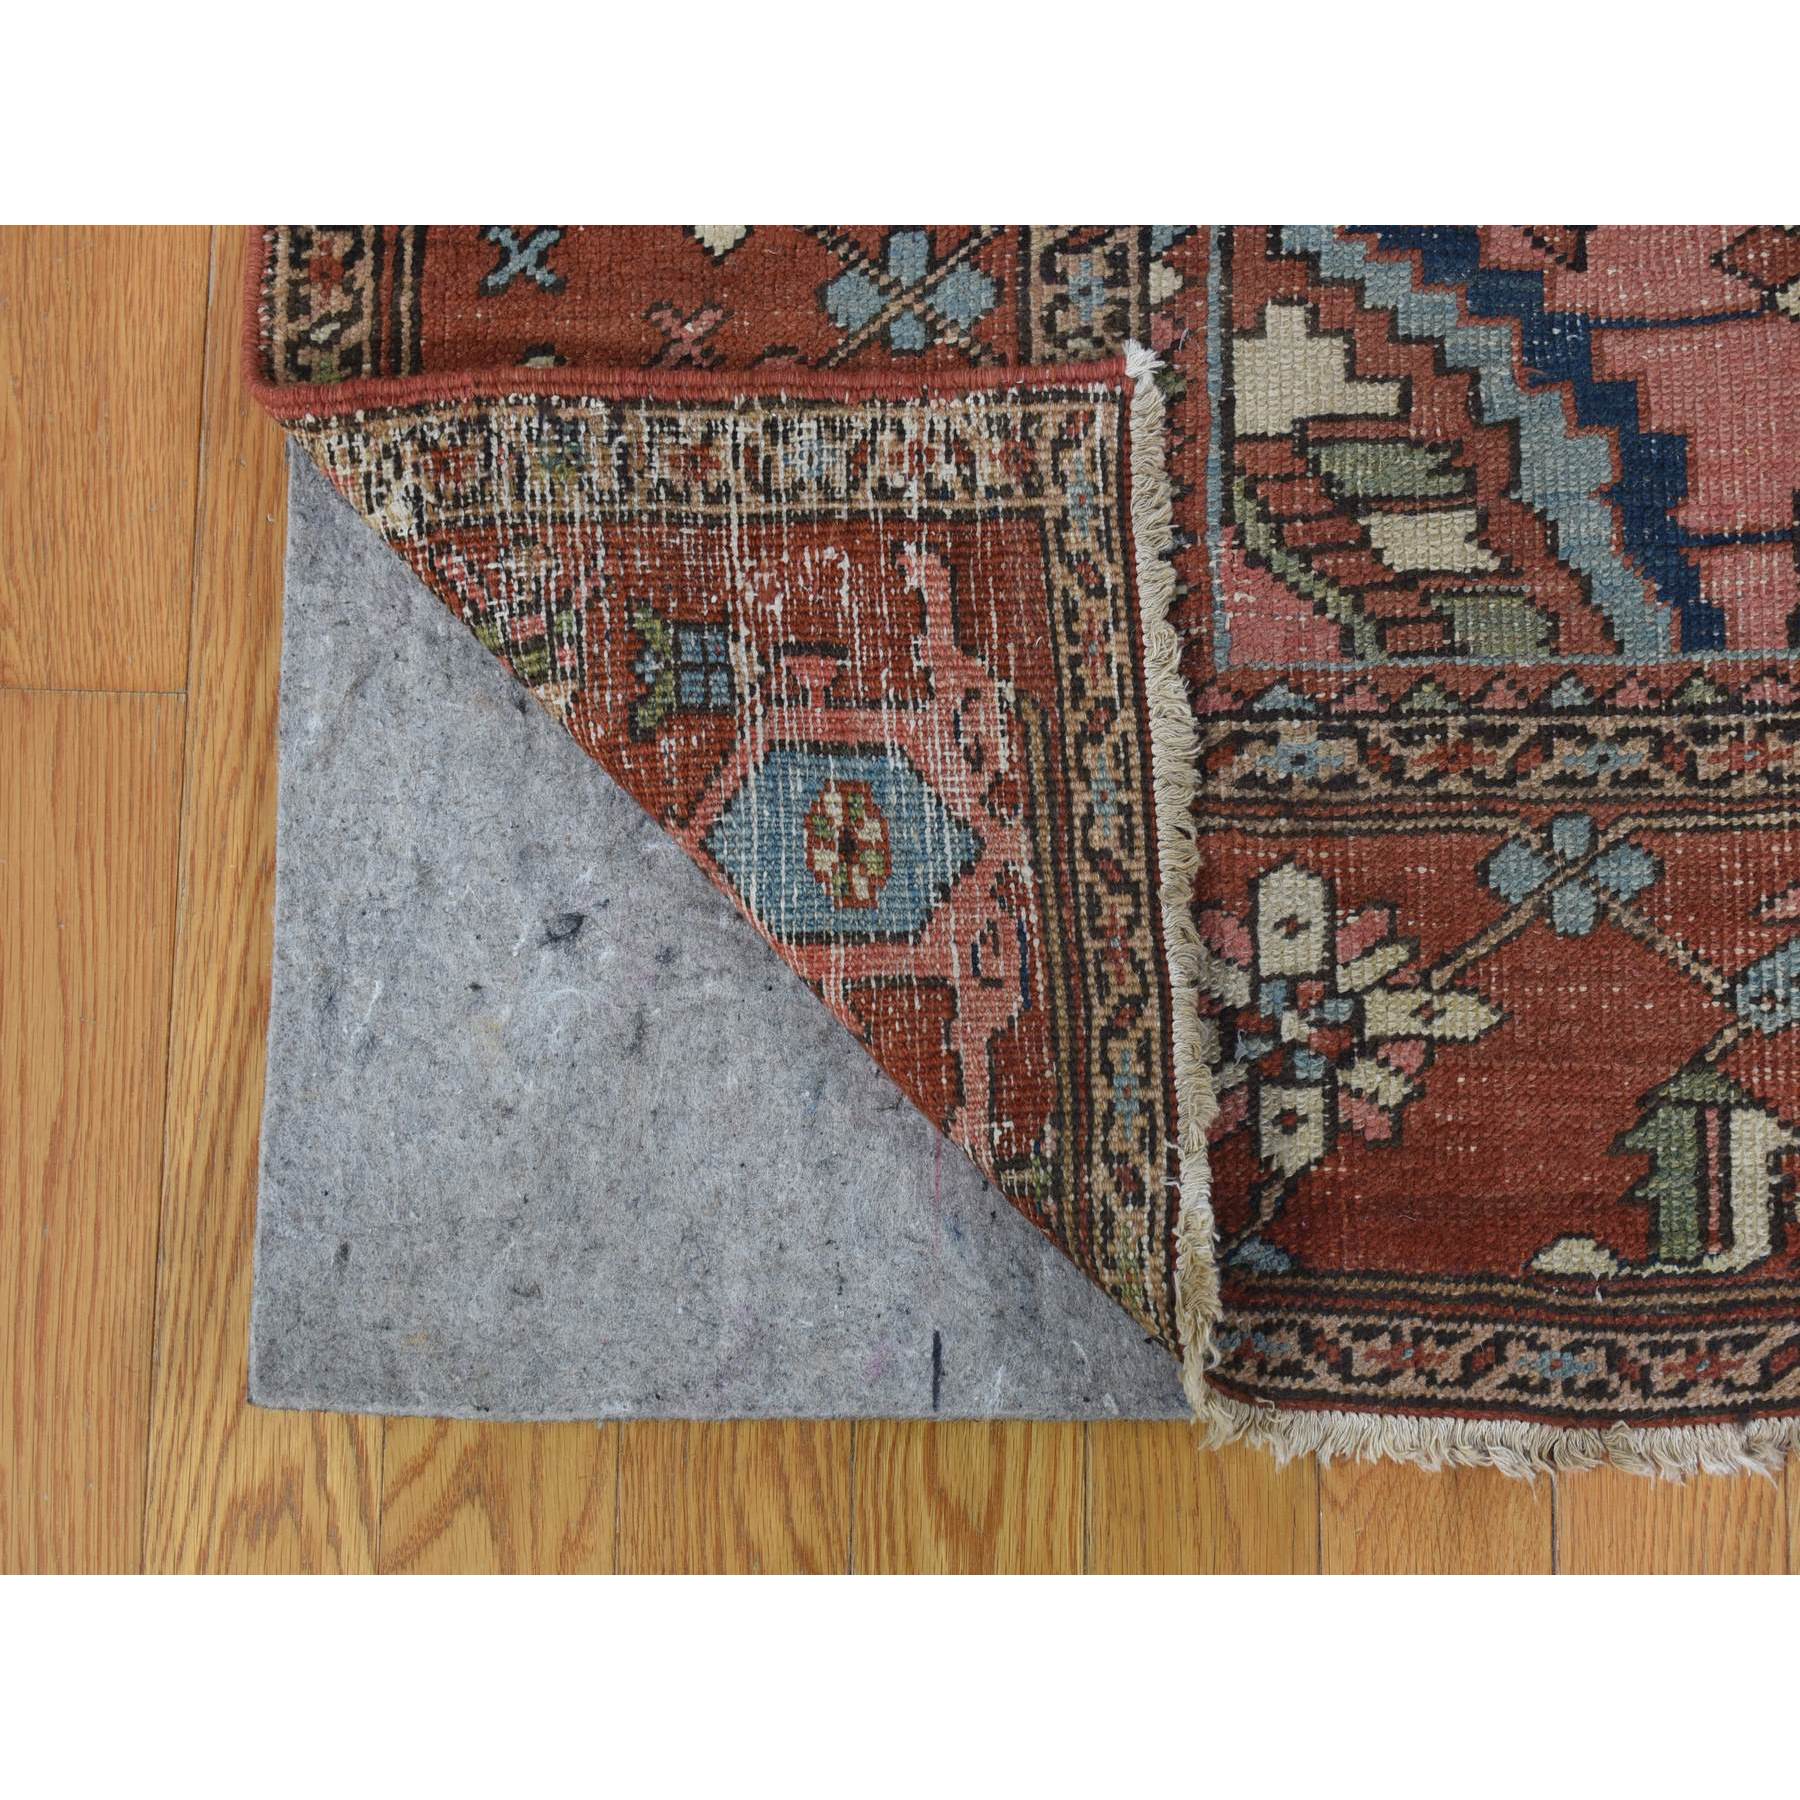 8'7"x12' Terracotta Red with Light Blue Corners, Antique Persian Serapi Heriz Abrash Flower Medallion, Clean Good Condition Evenly Worn Hand Woven Pure Wool Oriental Rug 